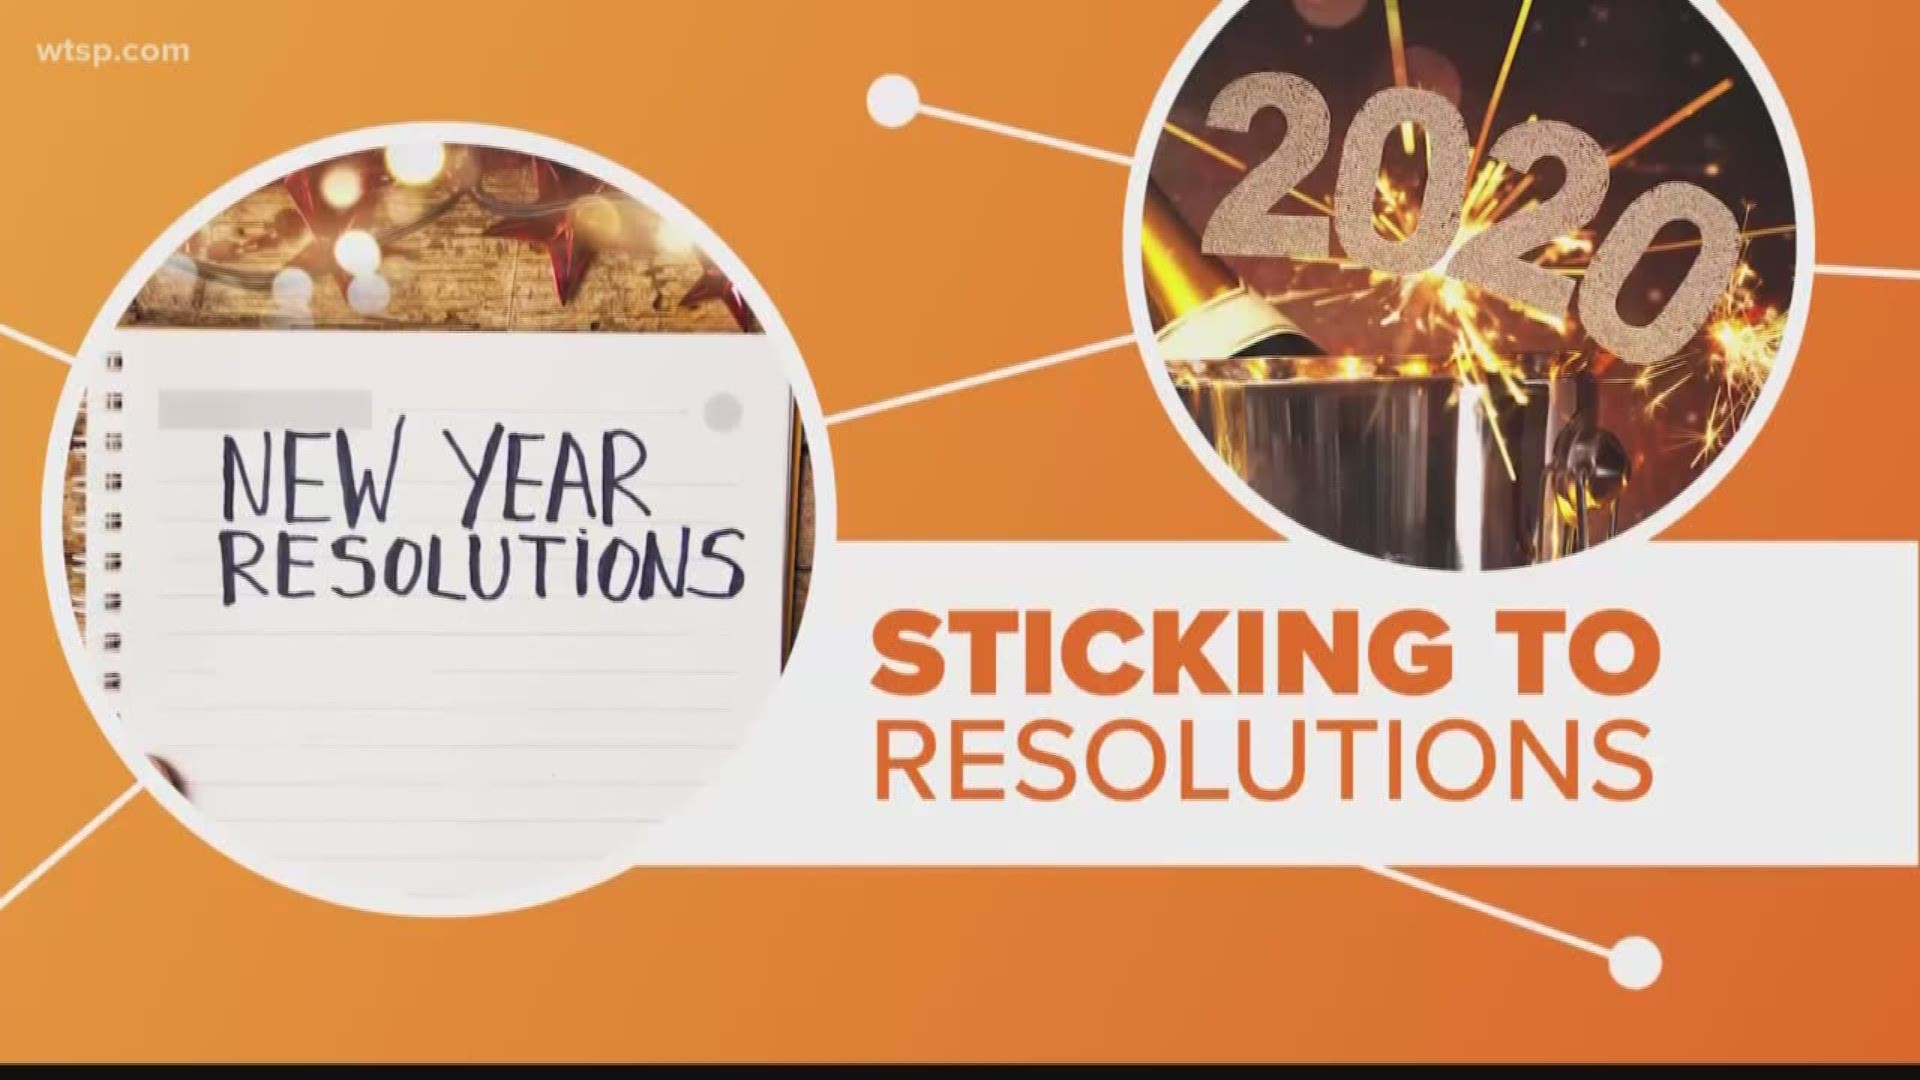 10News reporter Jenny Dean takes a look at how you can stick with your New Year's resolution.